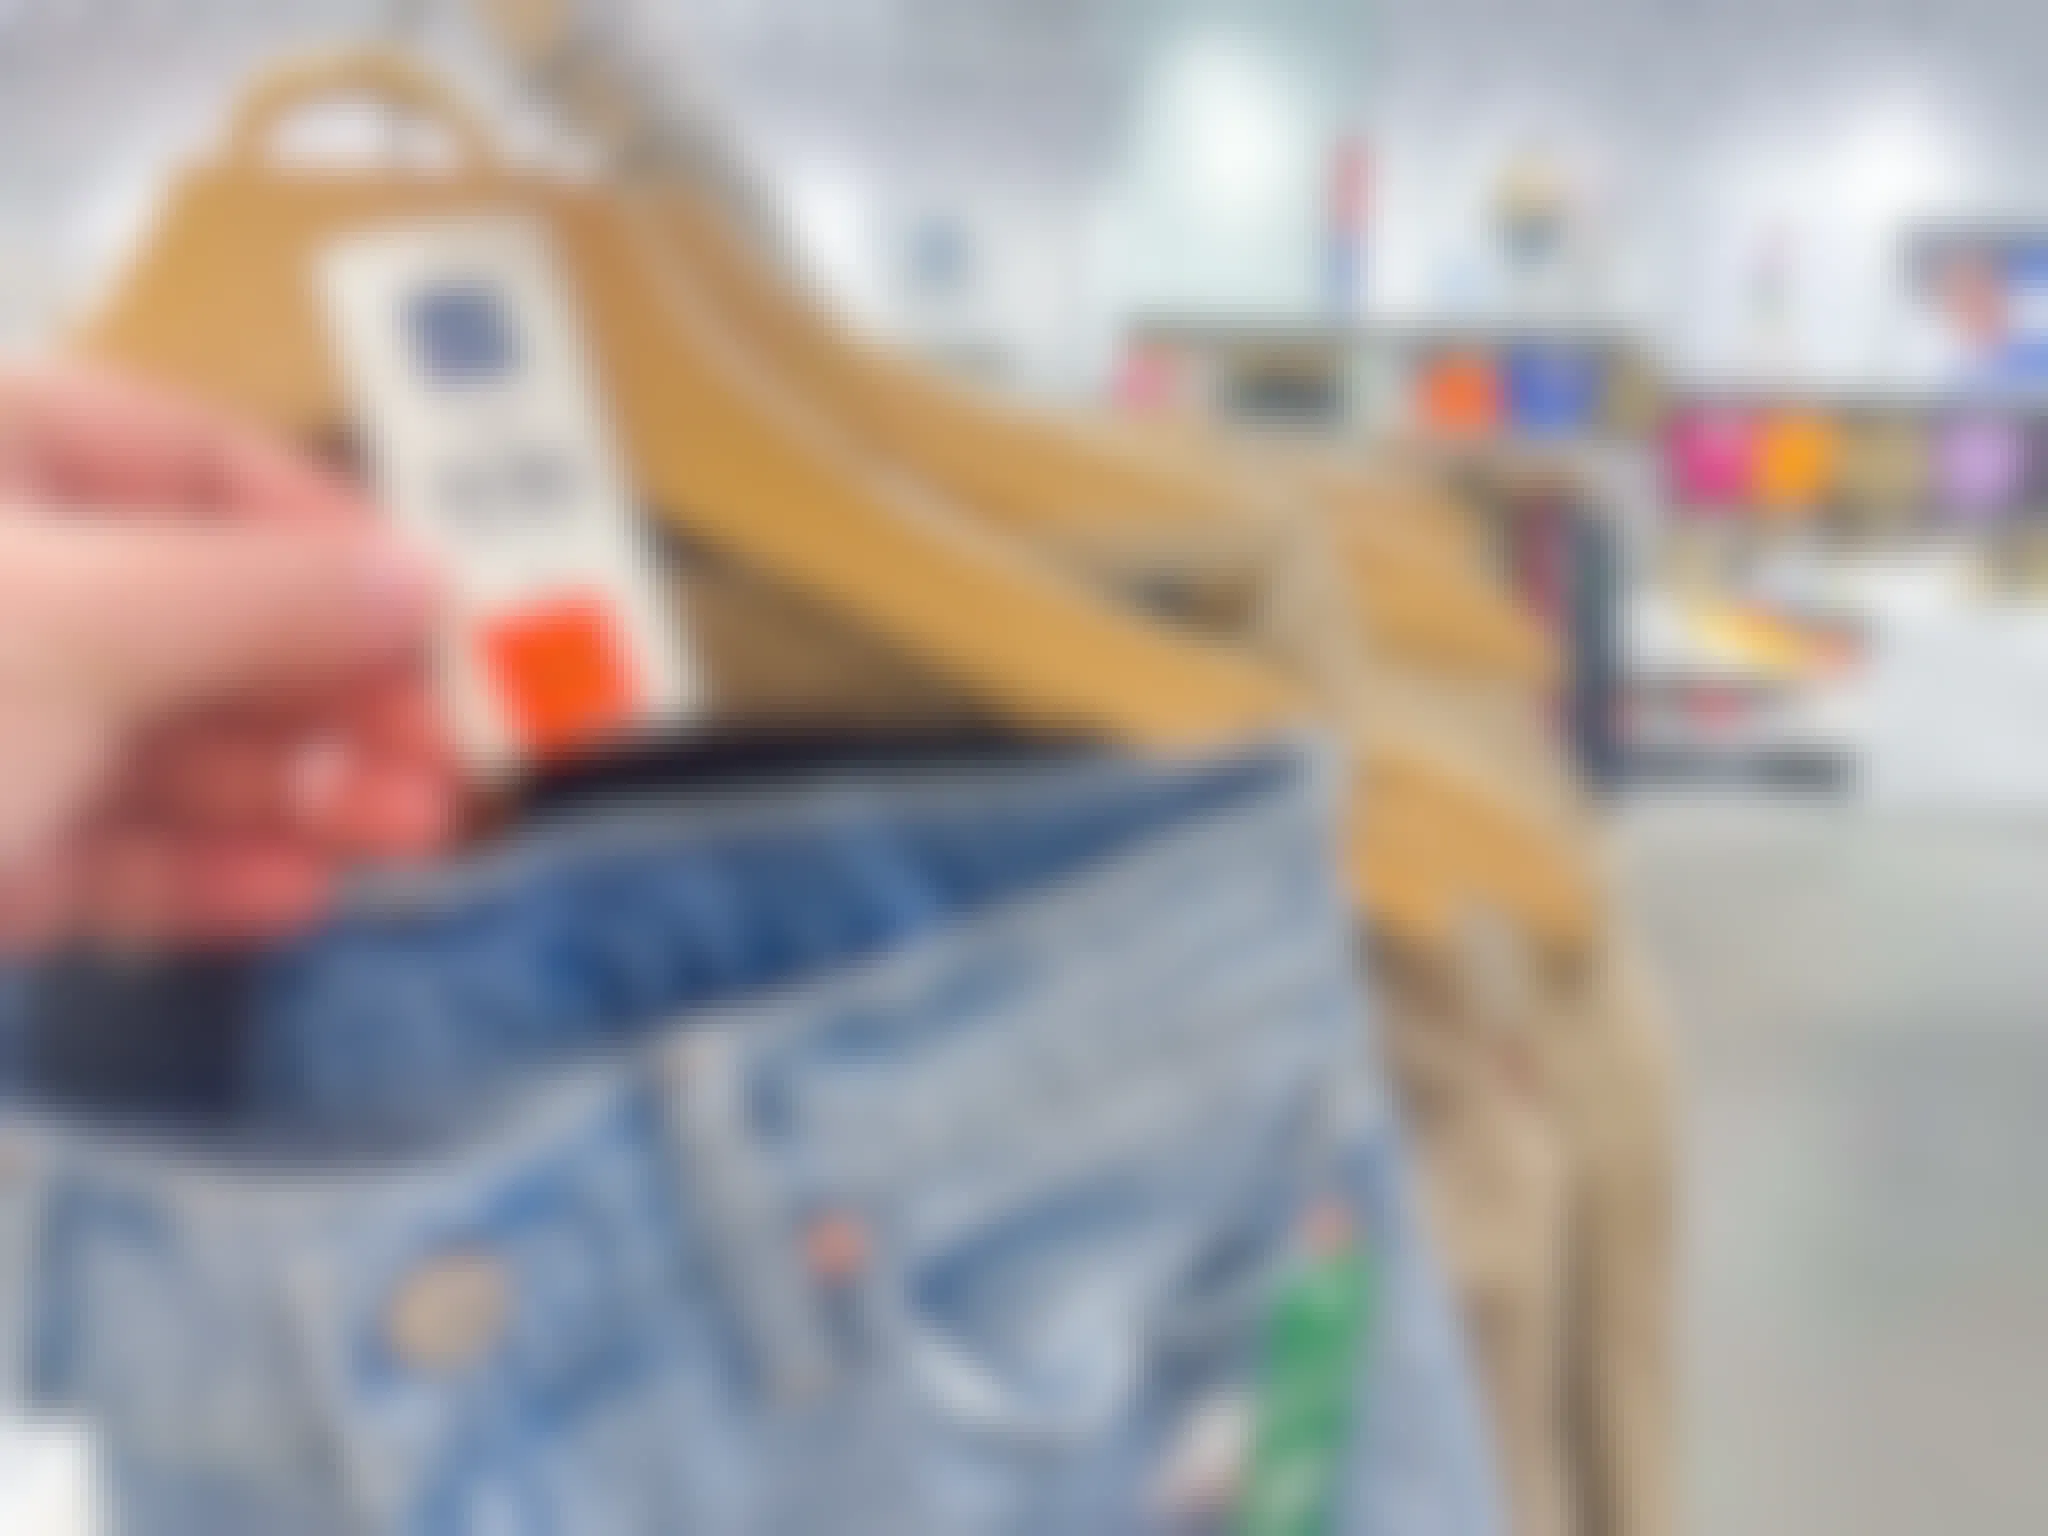 a person holding a gap orange tag on a pair of jeans on rack in store 